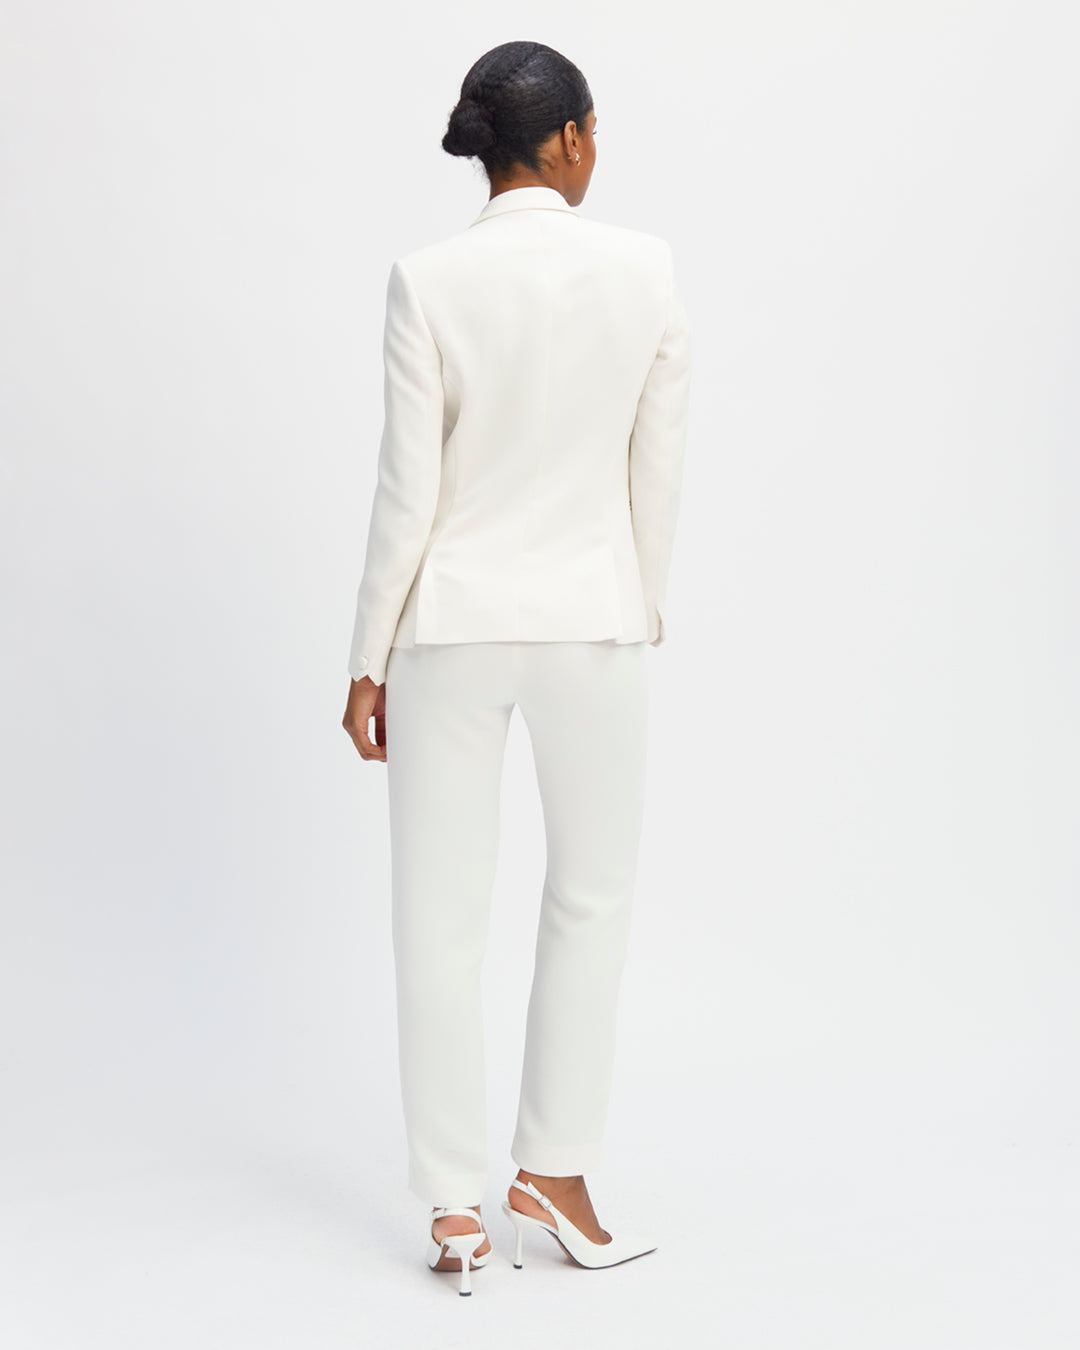 Tailor-blazer-jacket-white-knit-cut-tailor-collar-length-under-the-bottom-two-pockets-breasted-two-pockets-inside-fully-lined-button-down-sleeves-button-on-tone-17H10-tailors-for-women-paris-